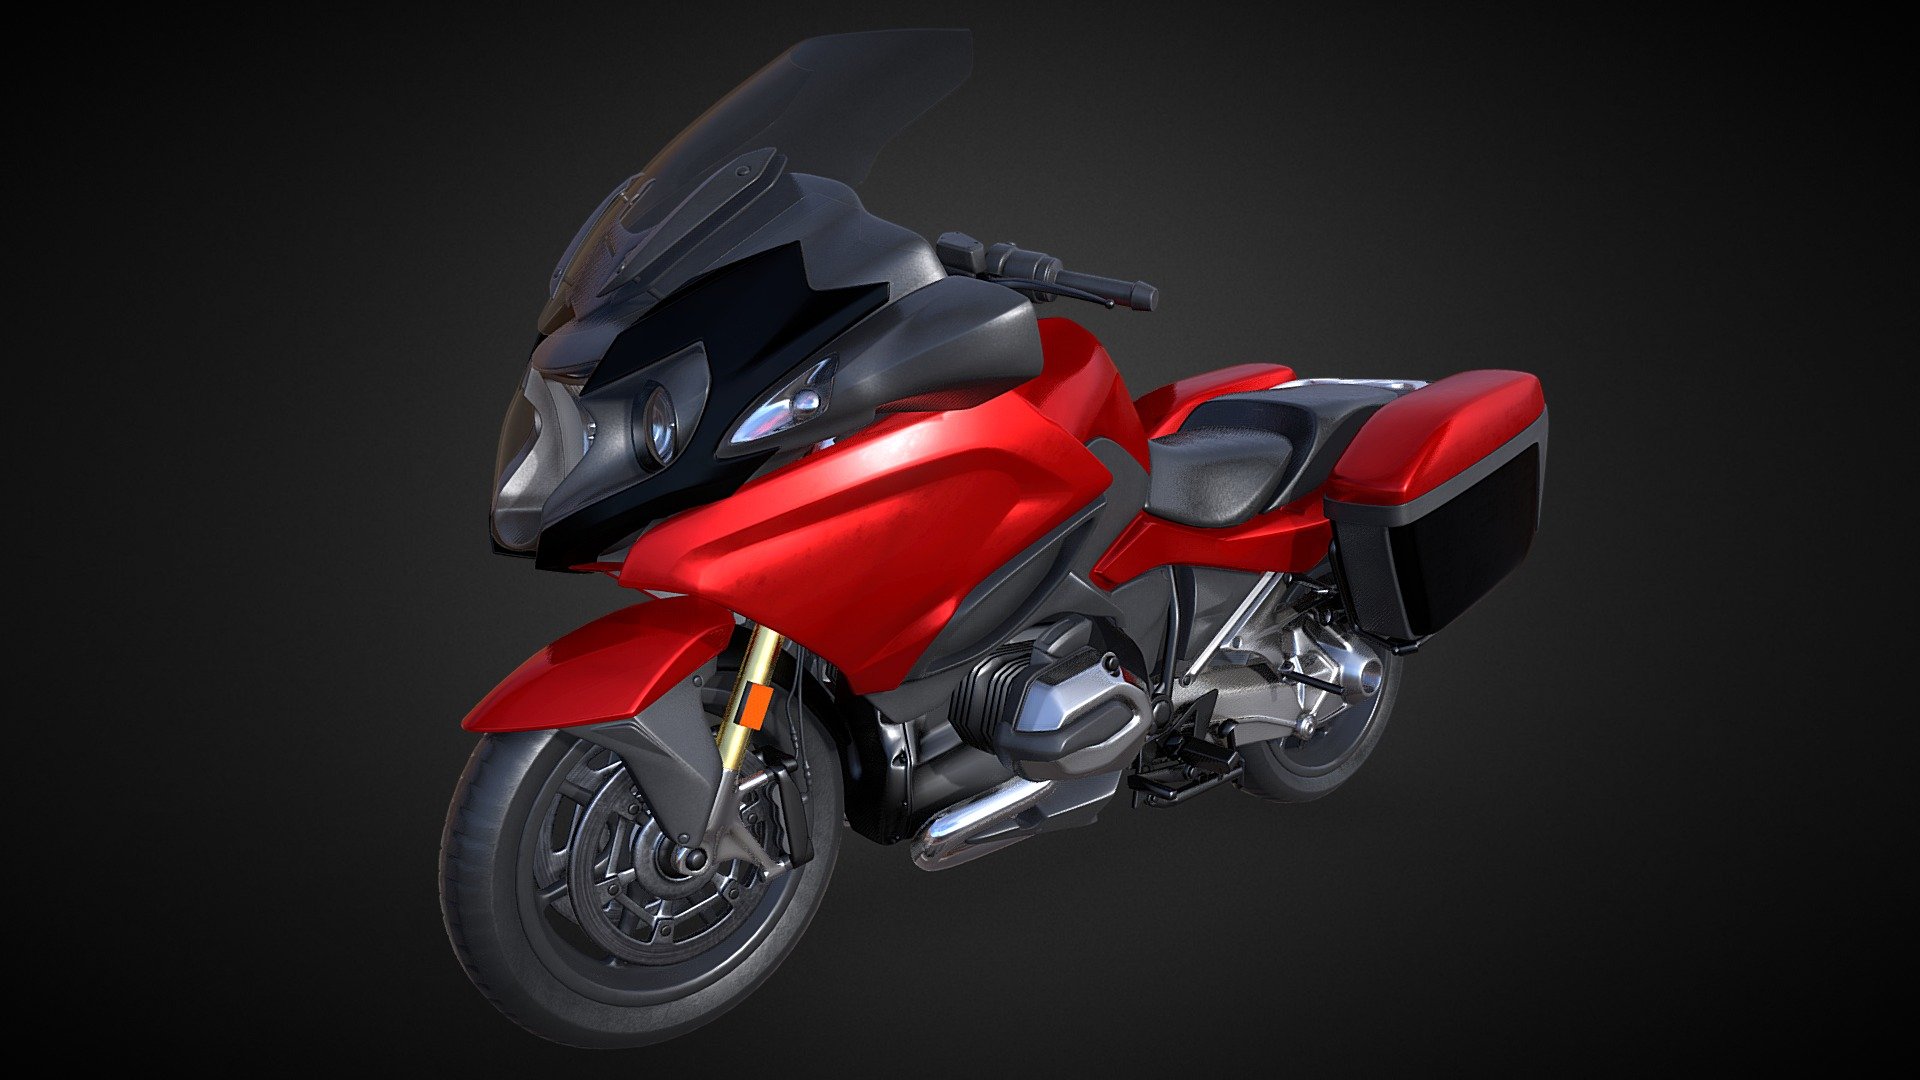 German sport touring motorcycle HighPoly 3DModel based on bmw 1200rt touring motorcycle - Sport touring motorcycle HighPoly 3DModel - Buy Royalty Free 3D model by solid3d (@solidmodelsproject) 3d model